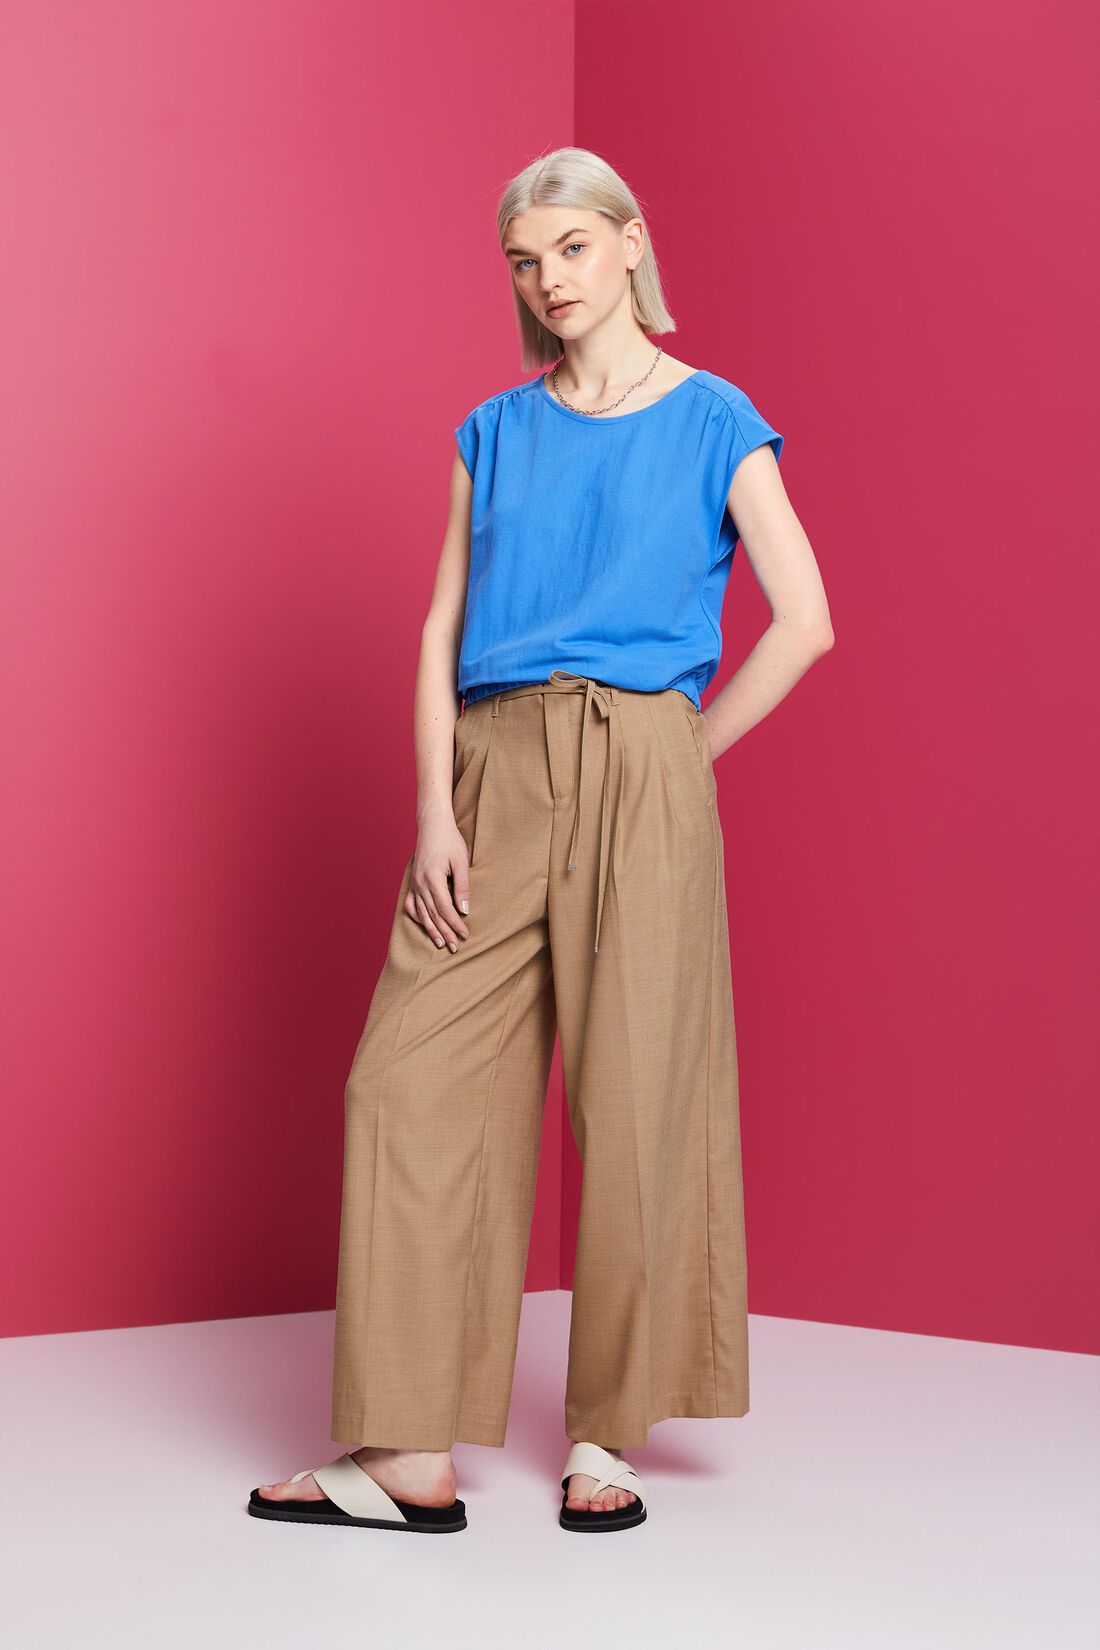 Esprit Womens Trousers Factory Shop Online South Africa |  espritsouthafrica.co.za